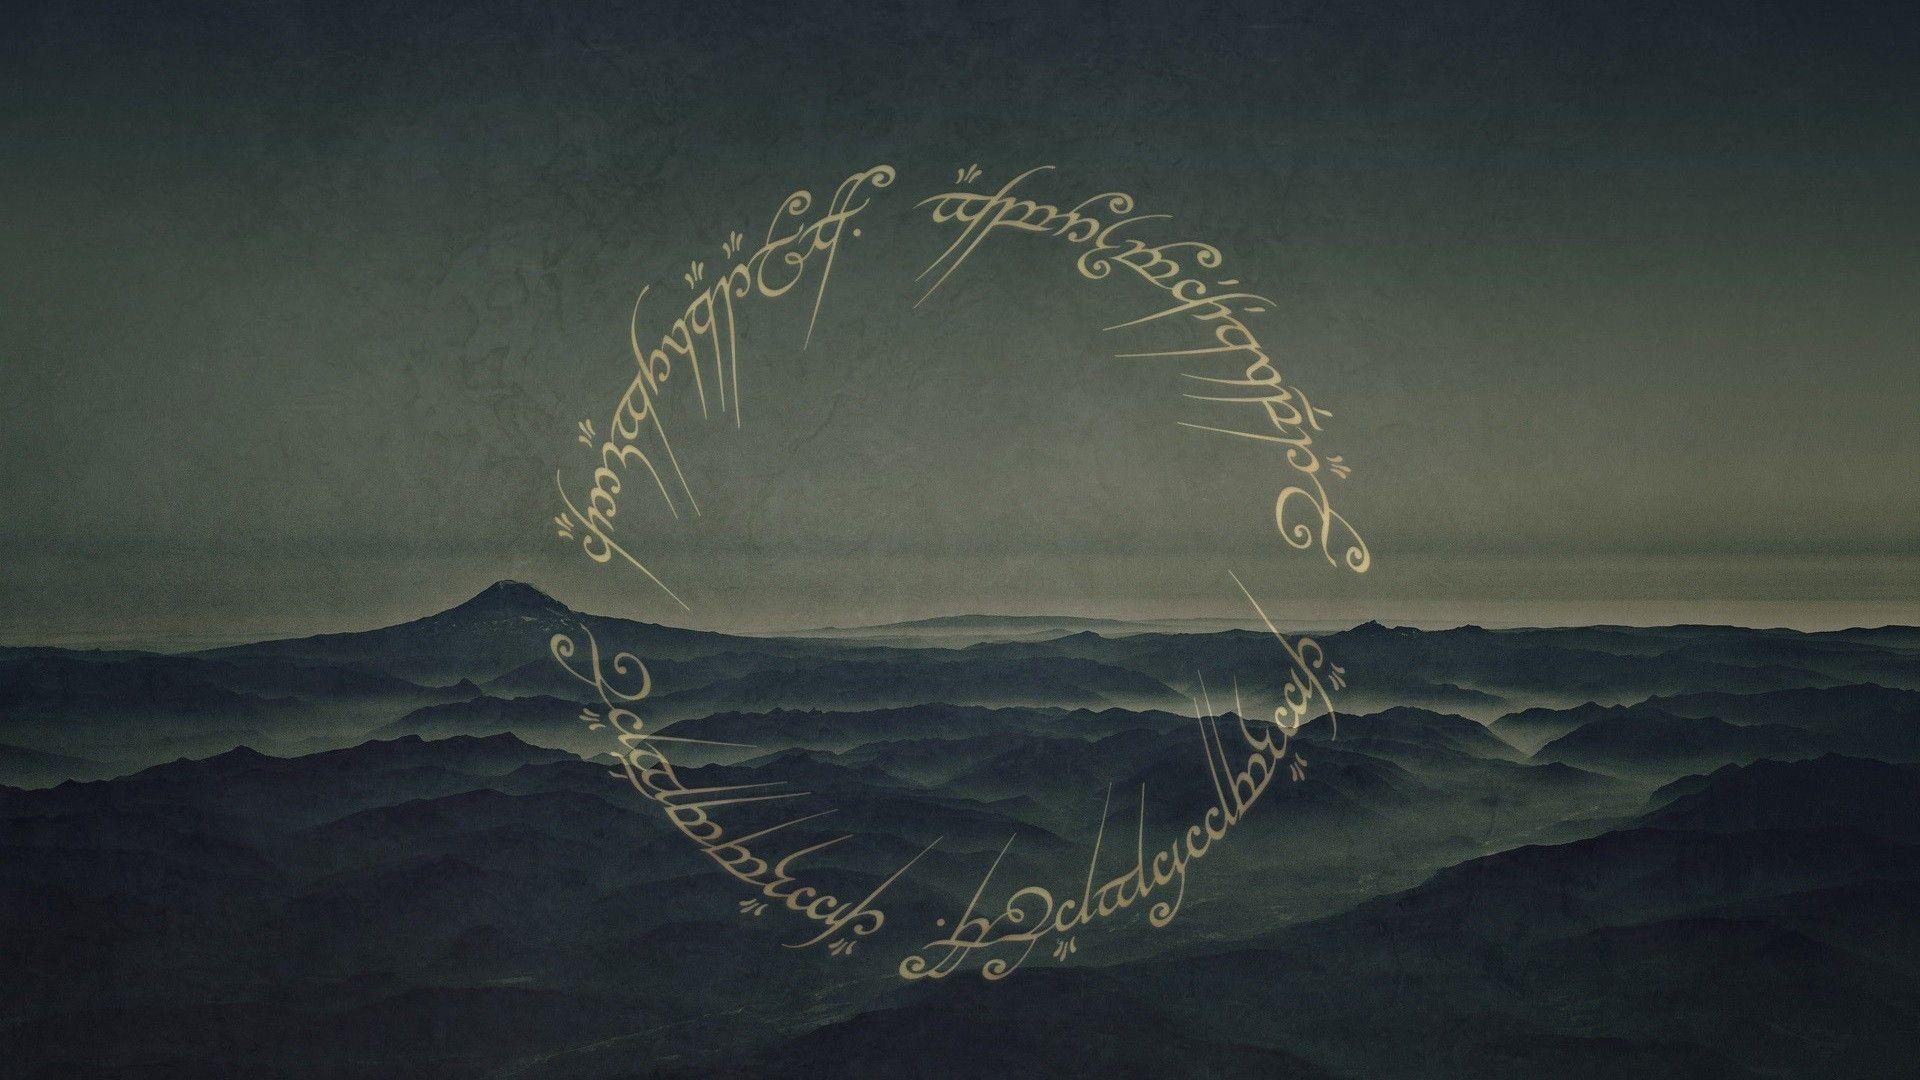 Lord of the Rings Wallpaper Free Download